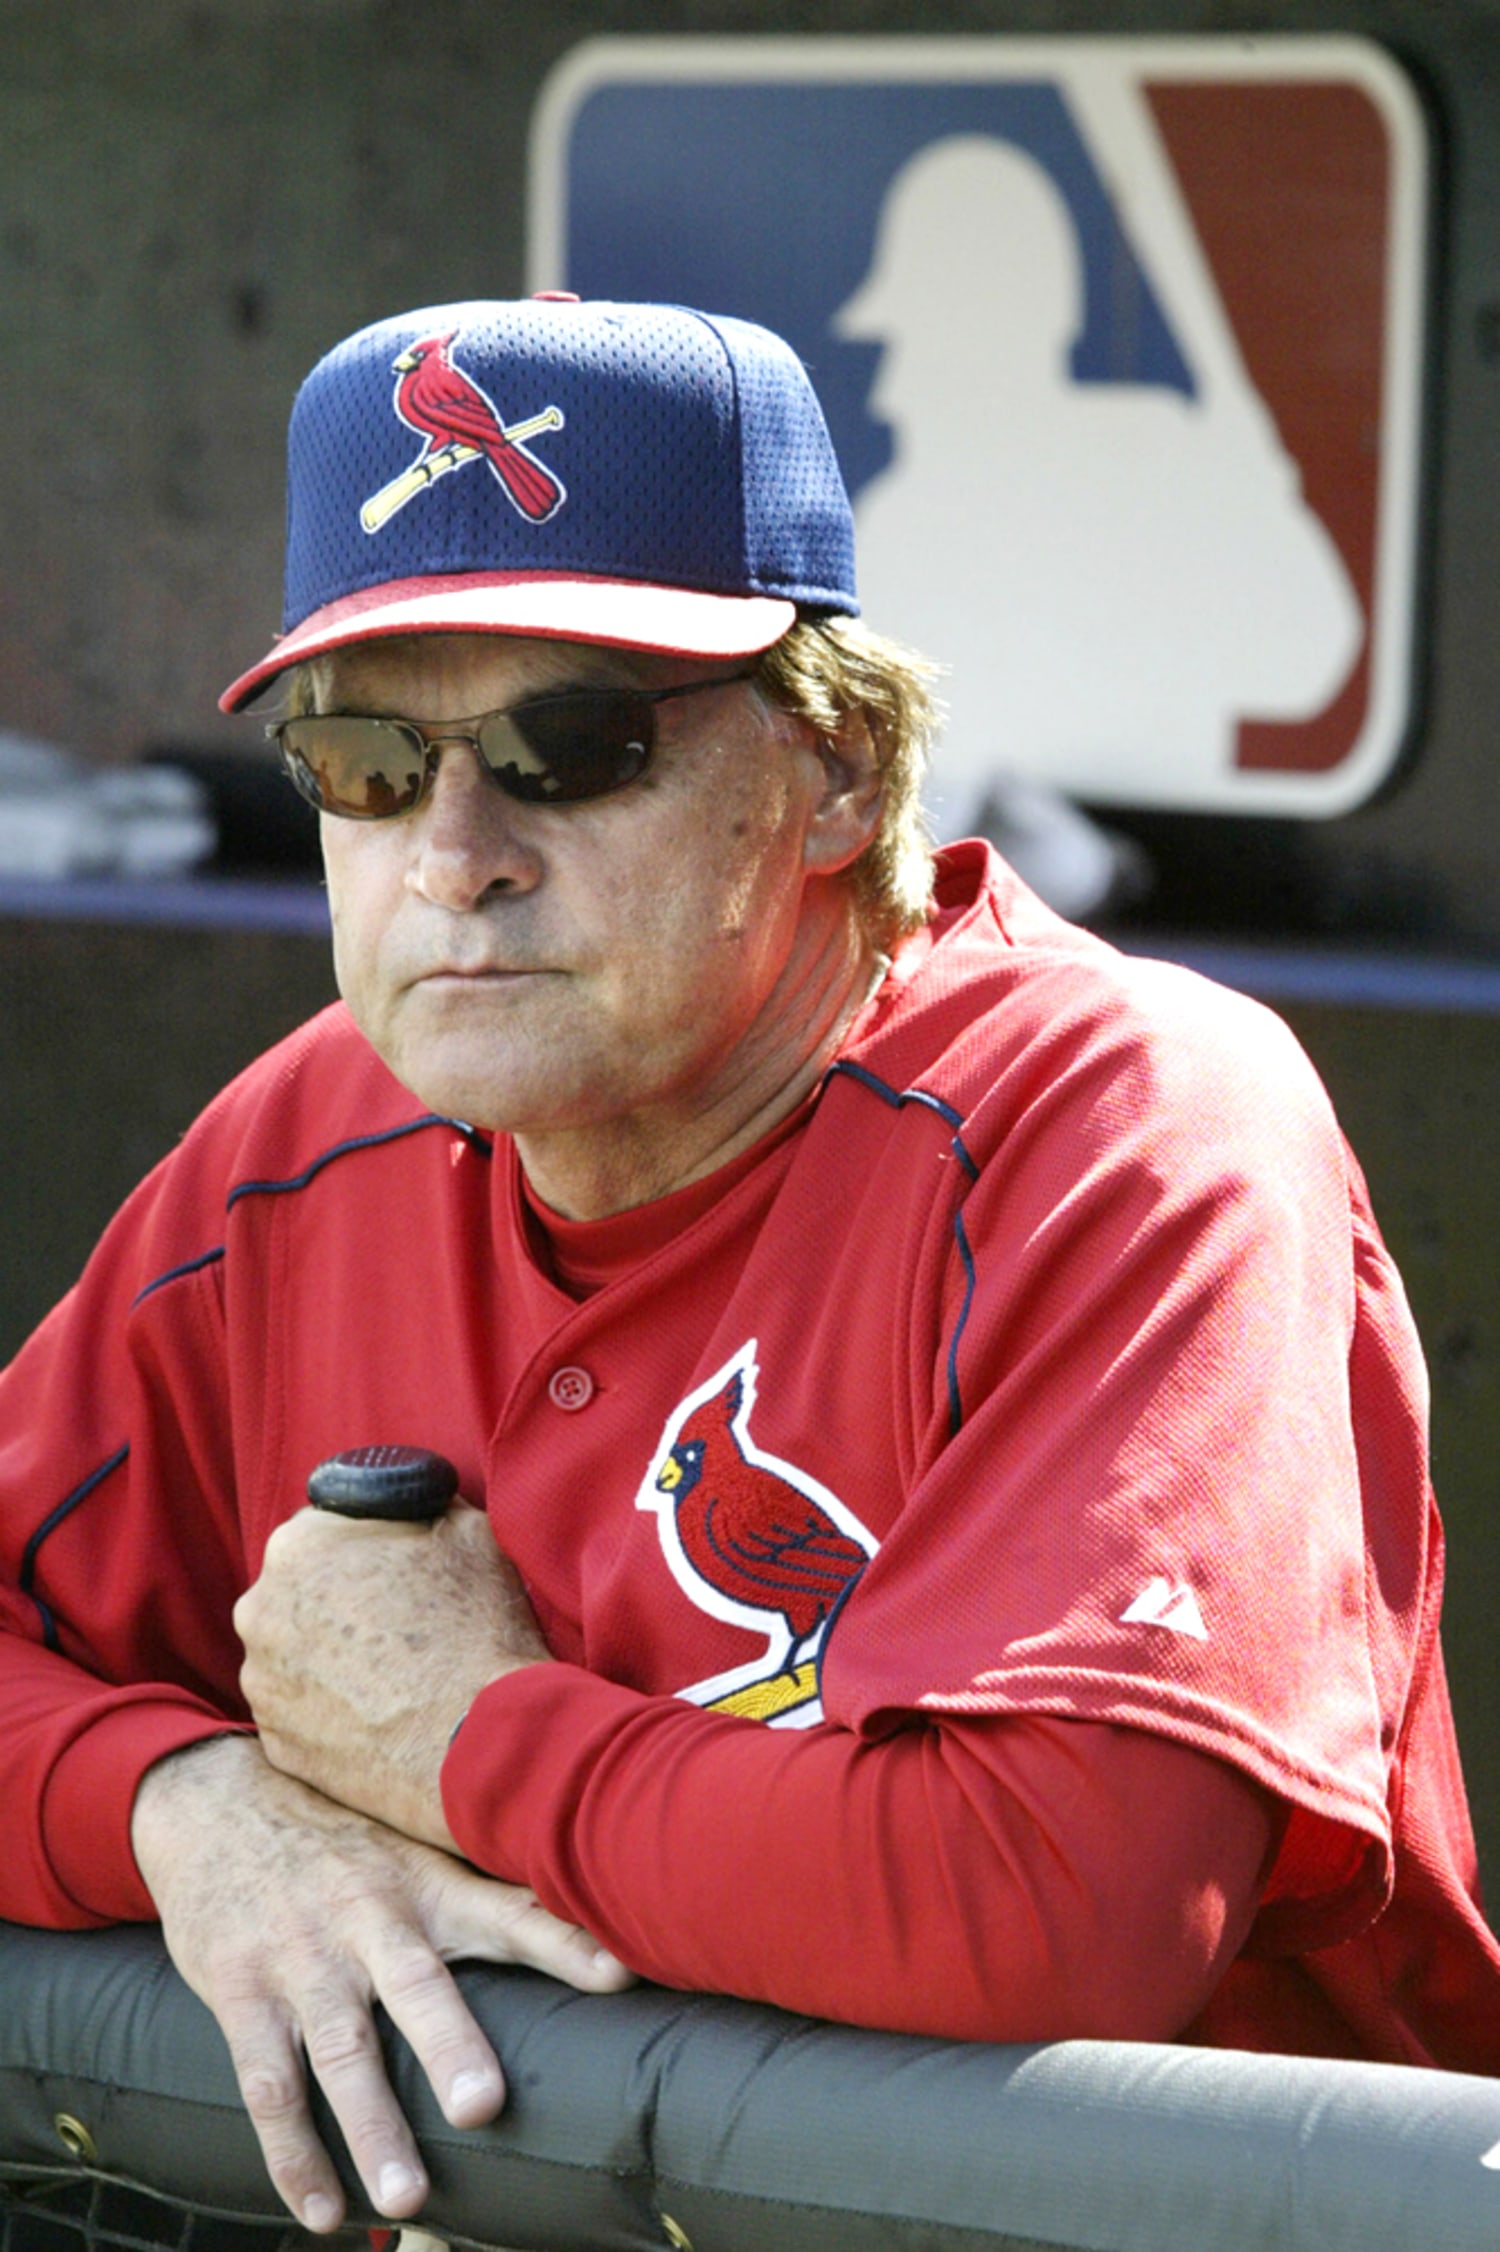 Red Sox pitcher finds Tony La Russa's lost World Series ring in